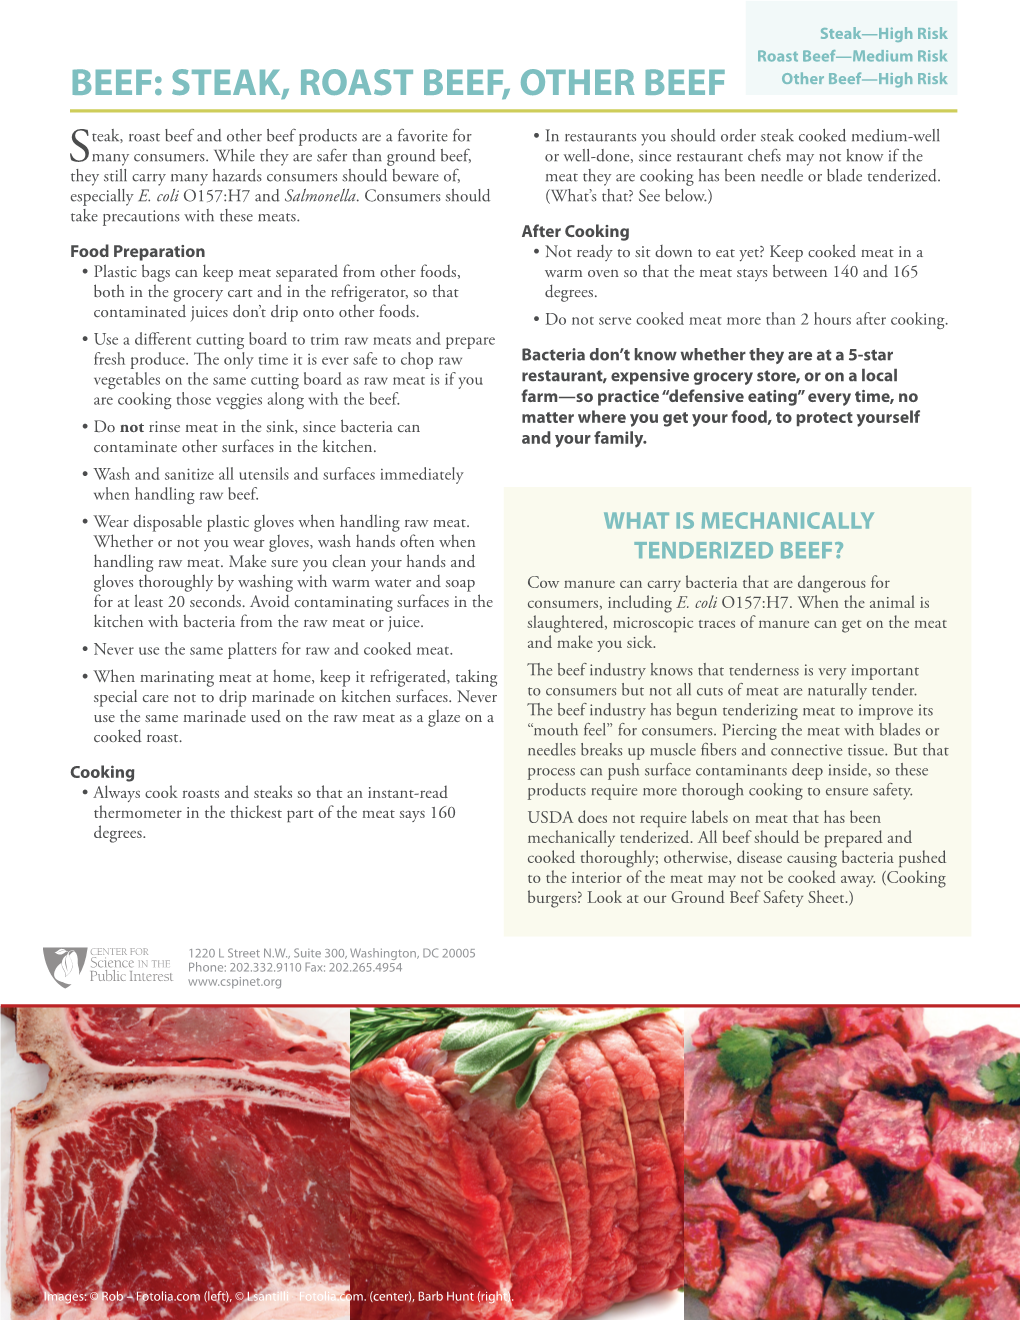 BEEF: STEAK, ROAST BEEF, OTHER BEEF Other Beef—High Risk